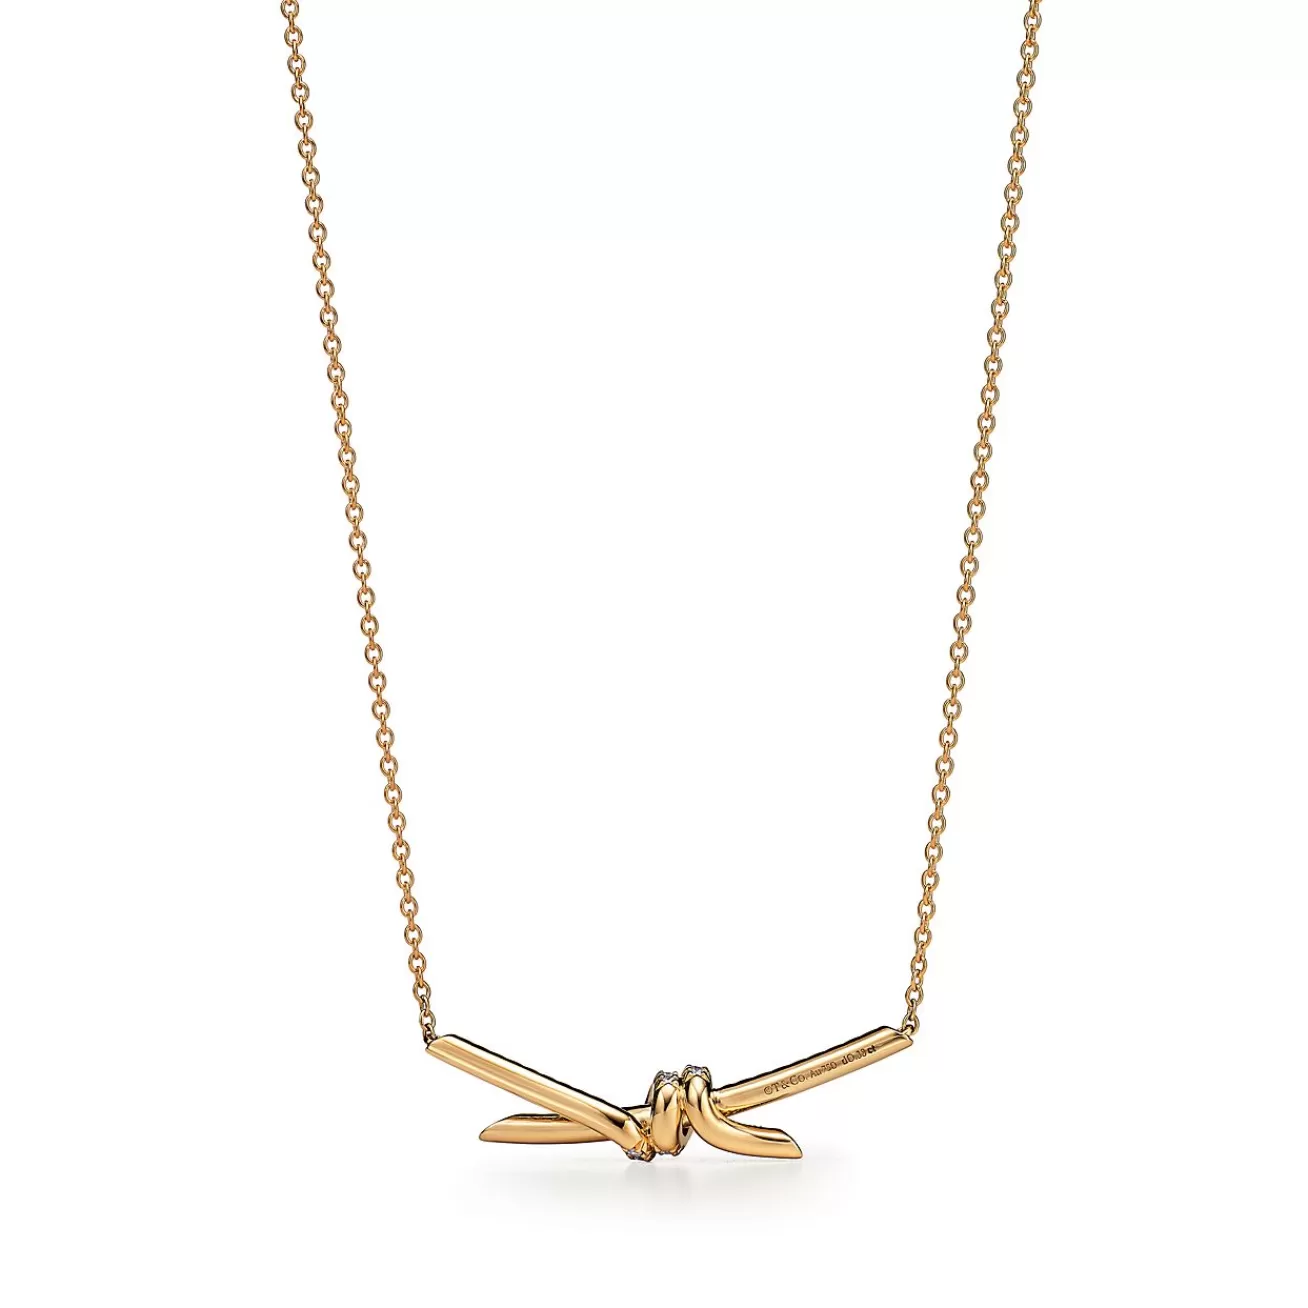 Tiffany & Co. Tiffany Knot Pendant in Yellow Gold with Diamonds | ^ Necklaces & Pendants | Gold Jewelry